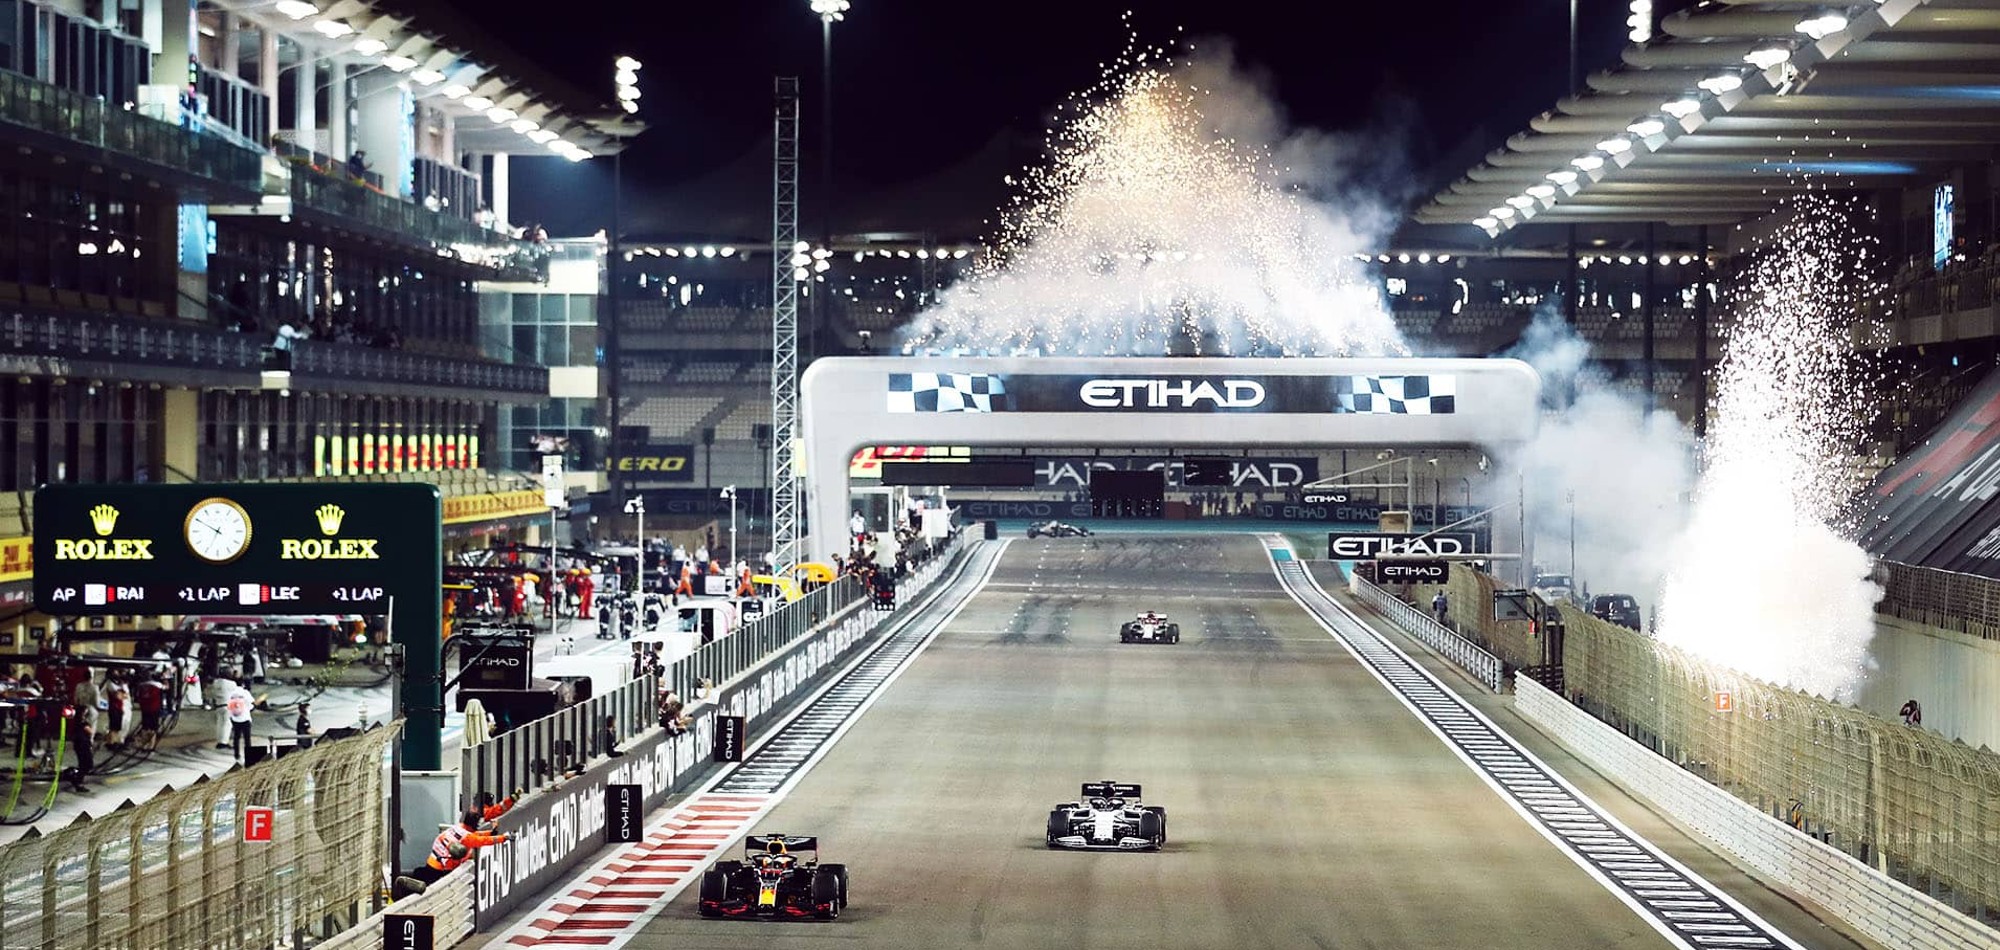 FIA planning new F1 race-management structure after Abu Dhabi controversy